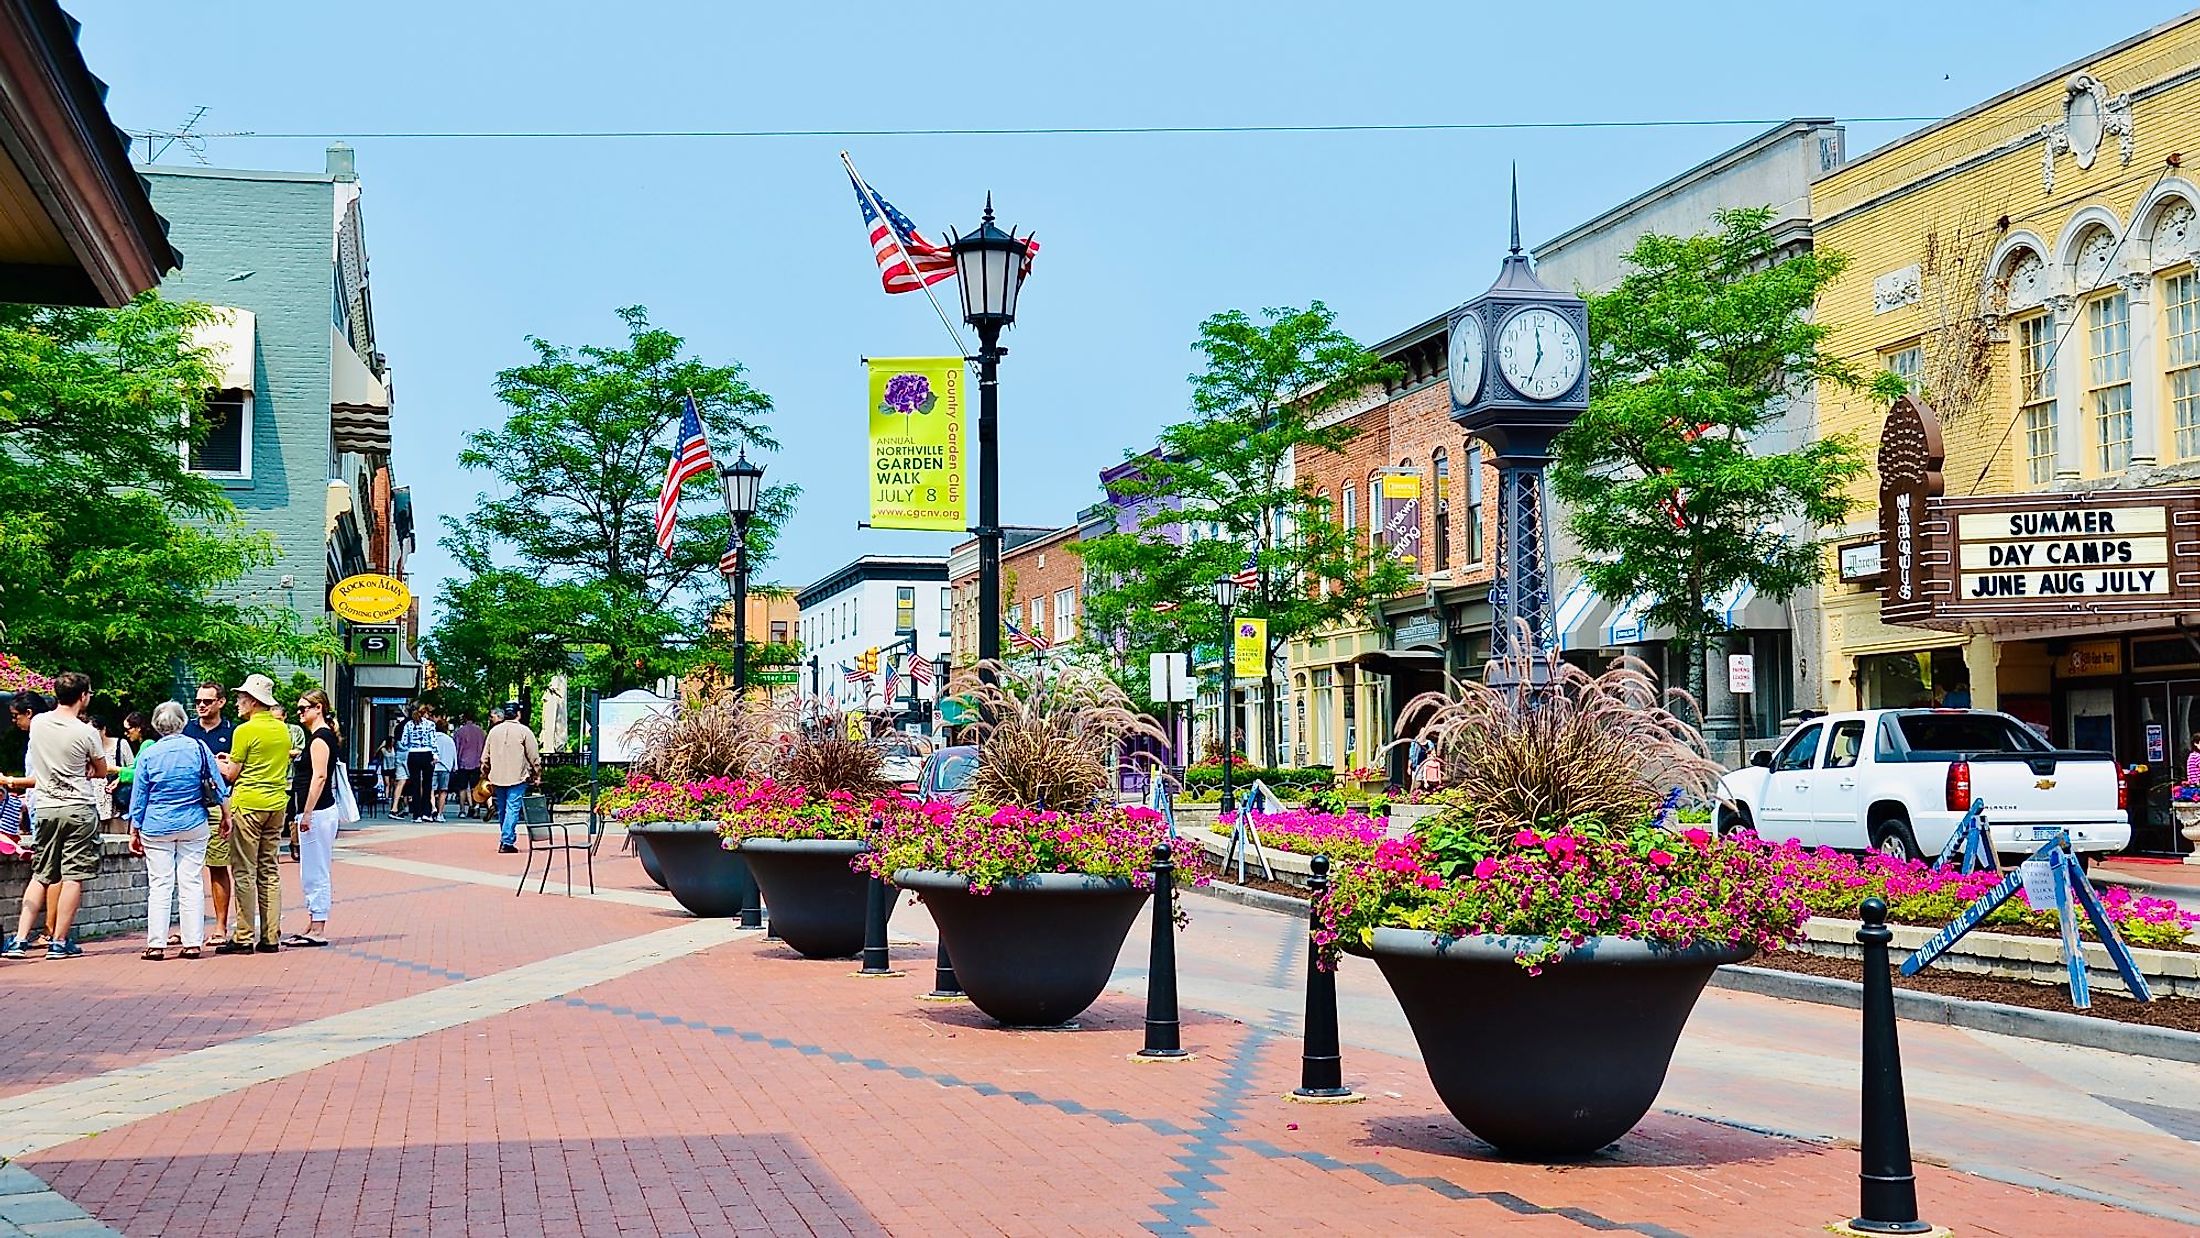 Beautiful summer at the town square in Northville, Michigan. Editorial credit: PQK / Shutterstock.com